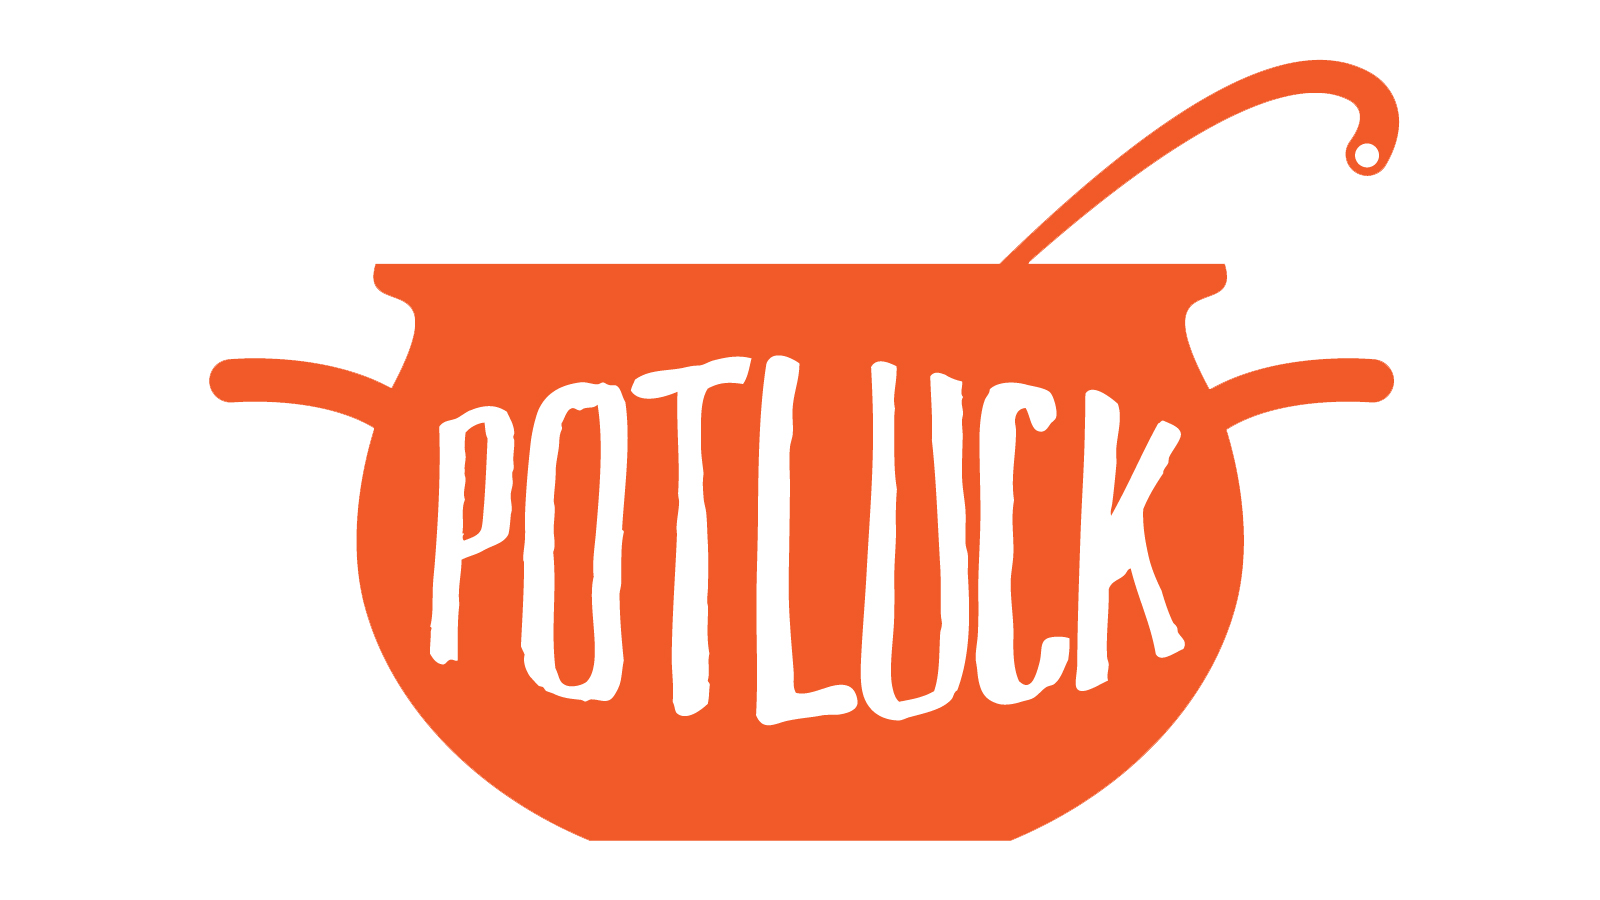 Picture #1771874 - office clipart potluck. office clipart potluck. 